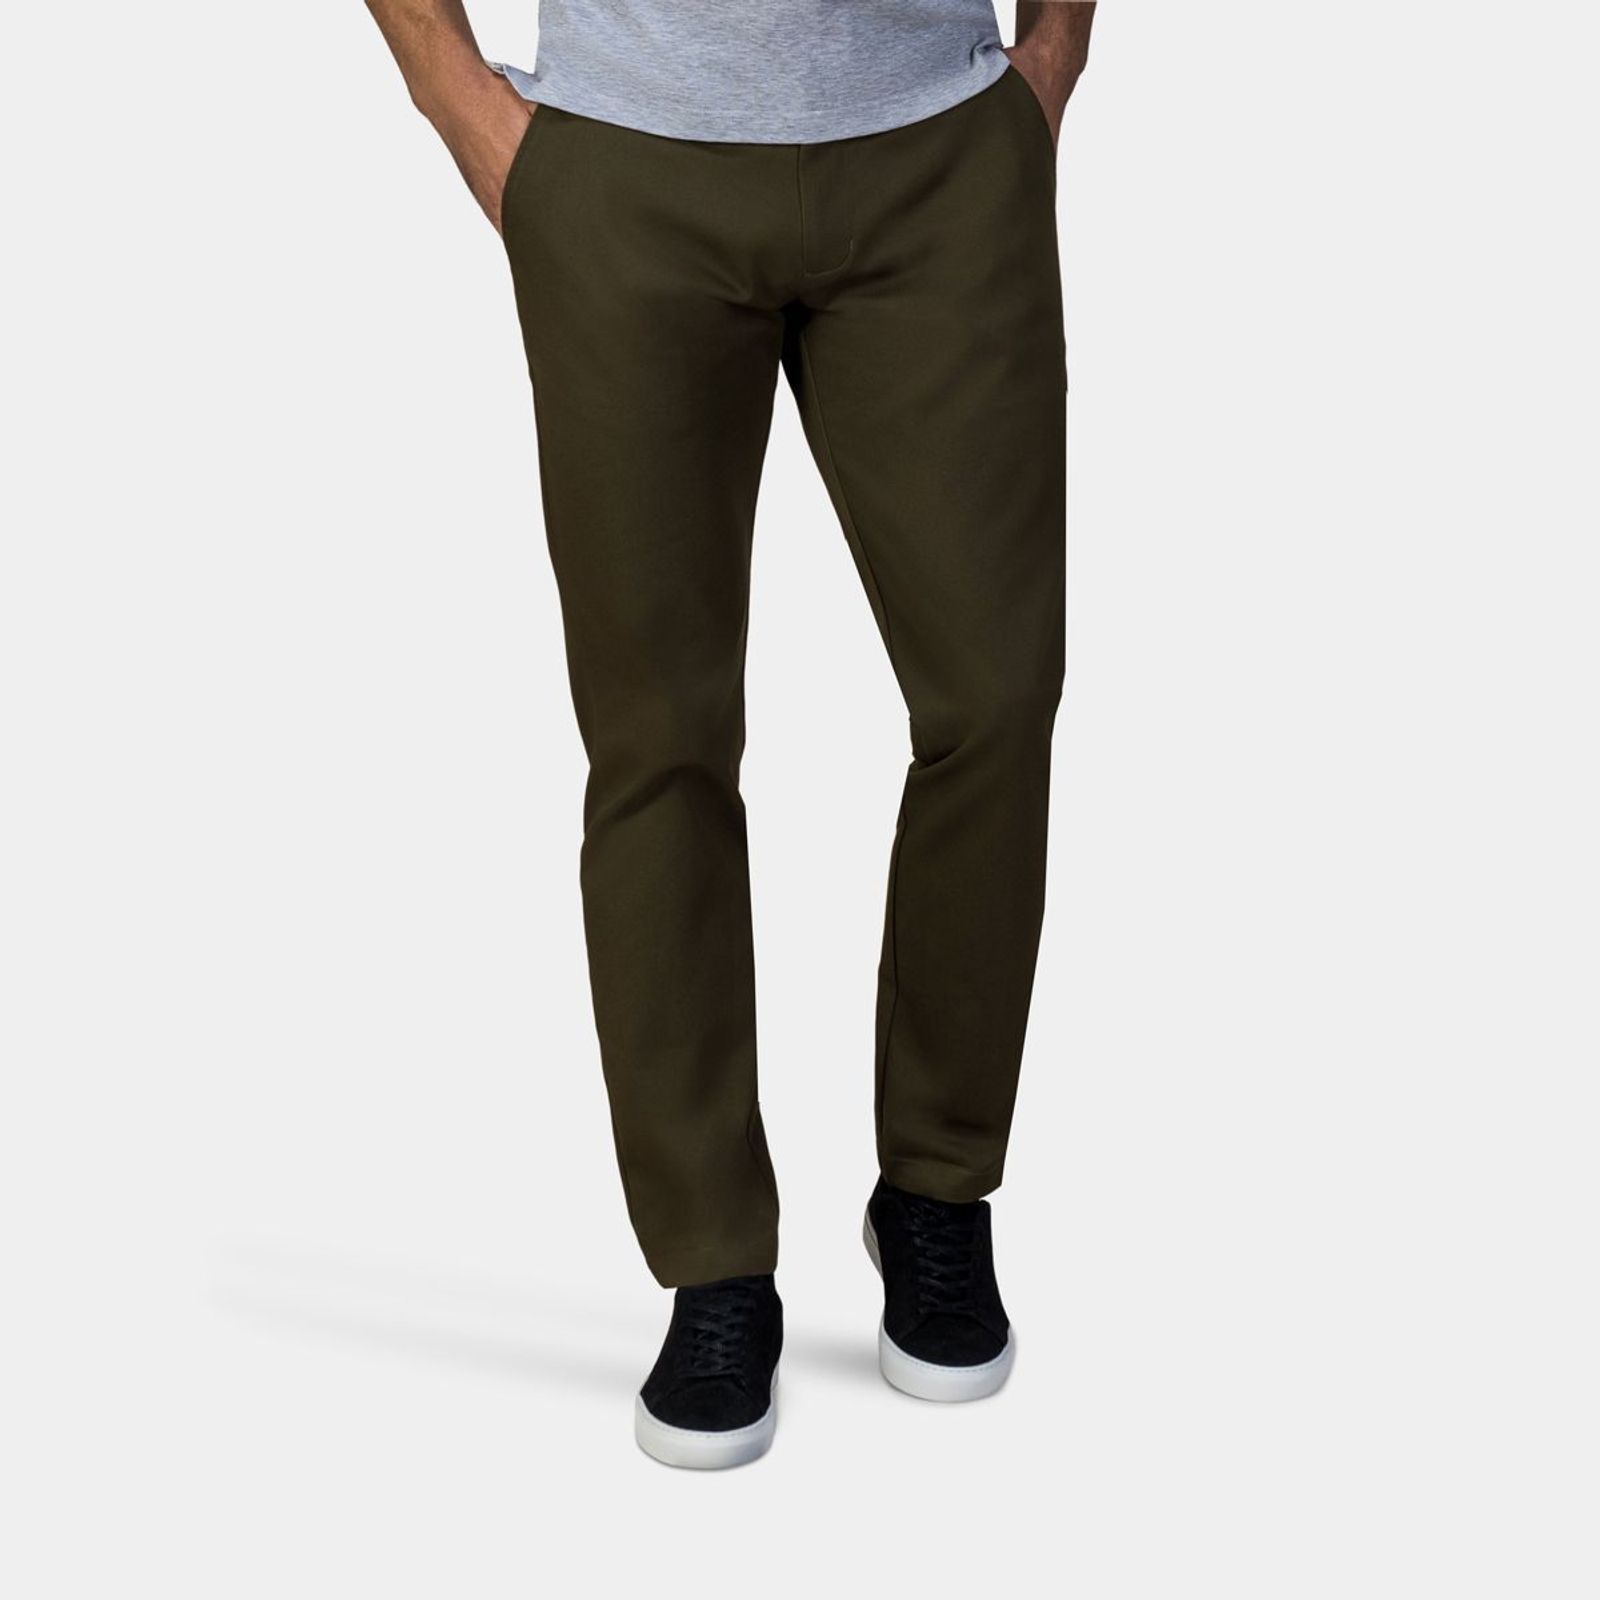 Olive green chinos | Tailor Store®